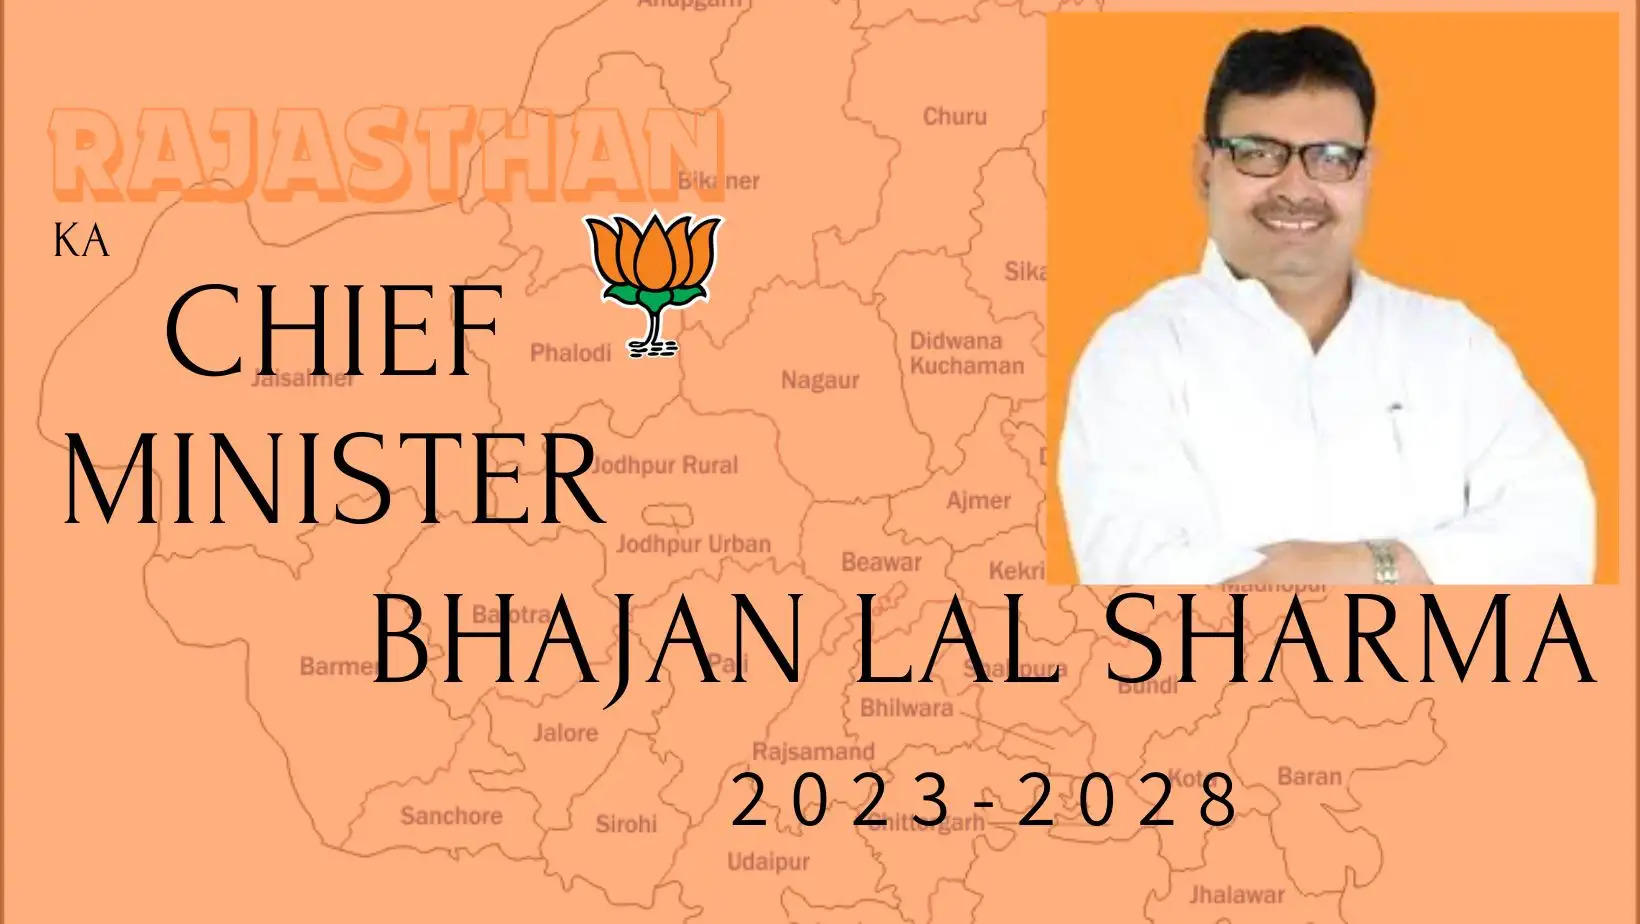 Bhajan Lal Sharma is the new Chief Minister of Rajasthan